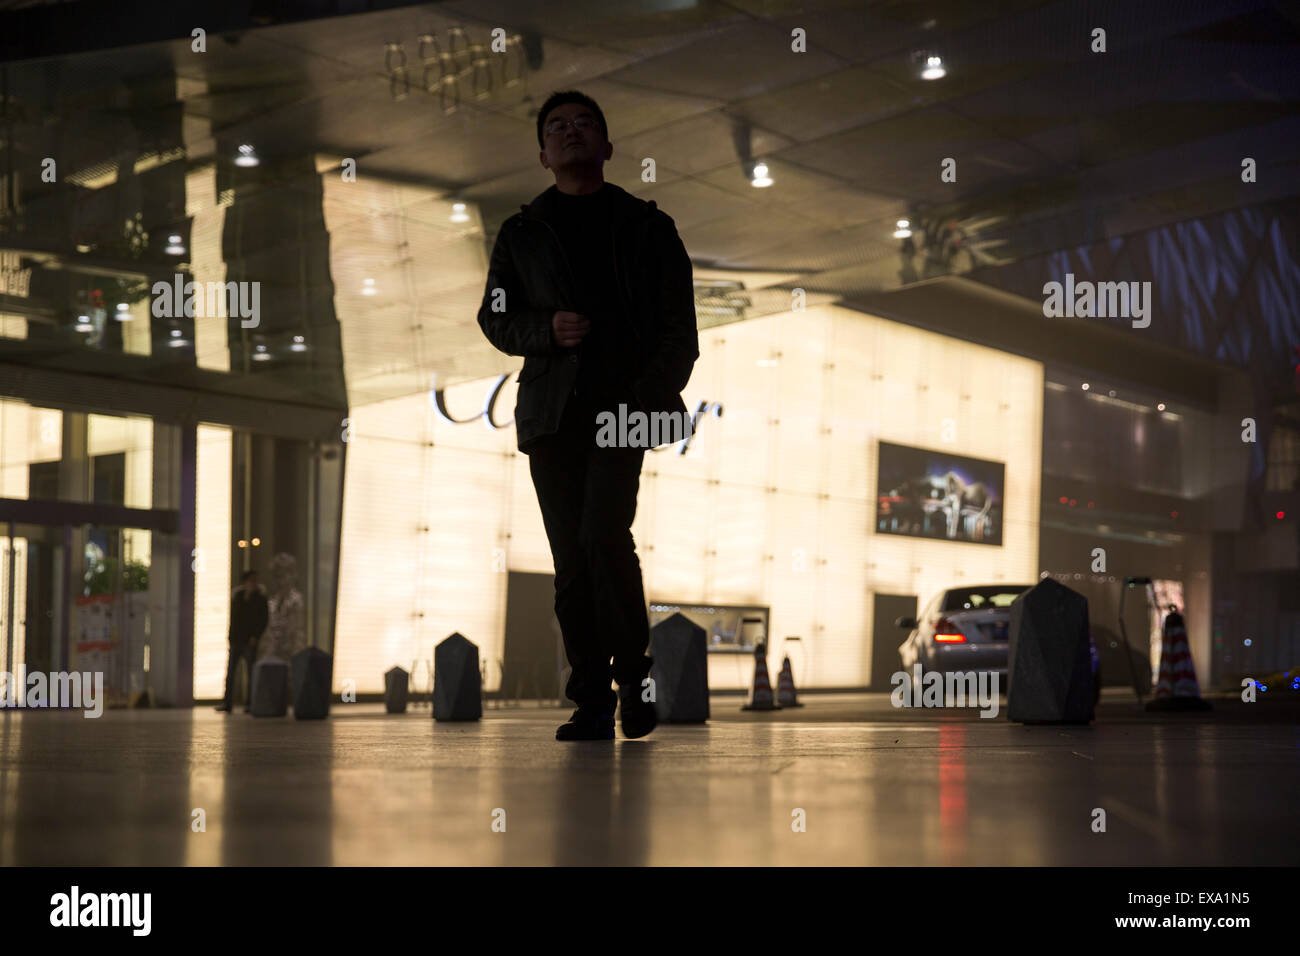 China, Shanghai, Young man walks past Cartier store at IFC Shopping Mall at night on winter evening Stock Photo